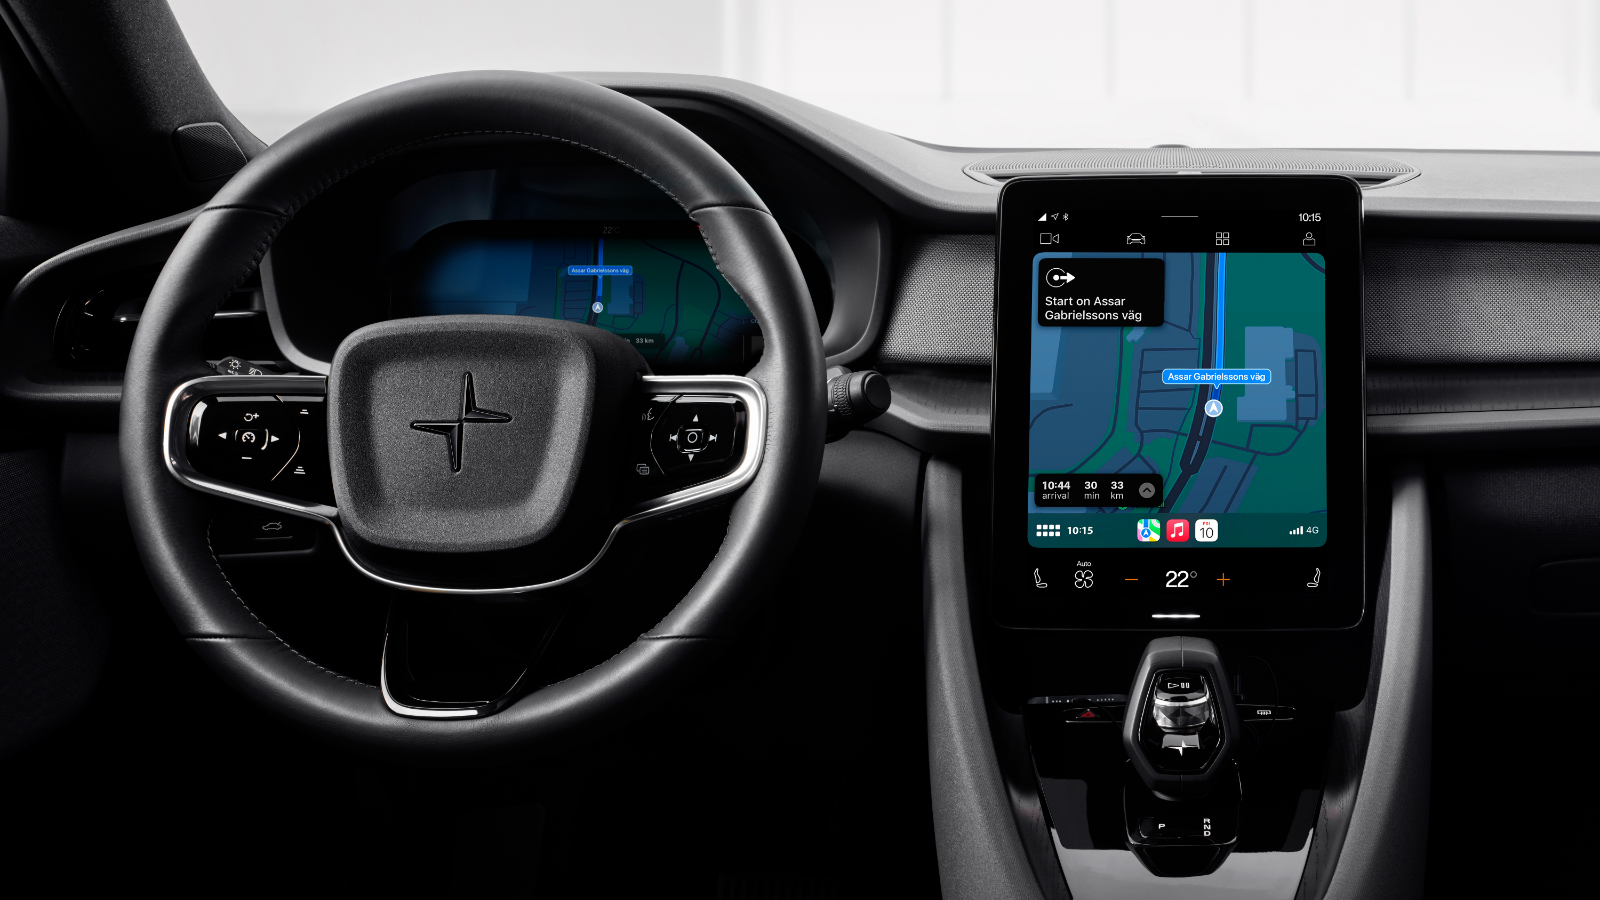 Polestar 2 Software Update Brings Wave of New Apple CarPlay Features